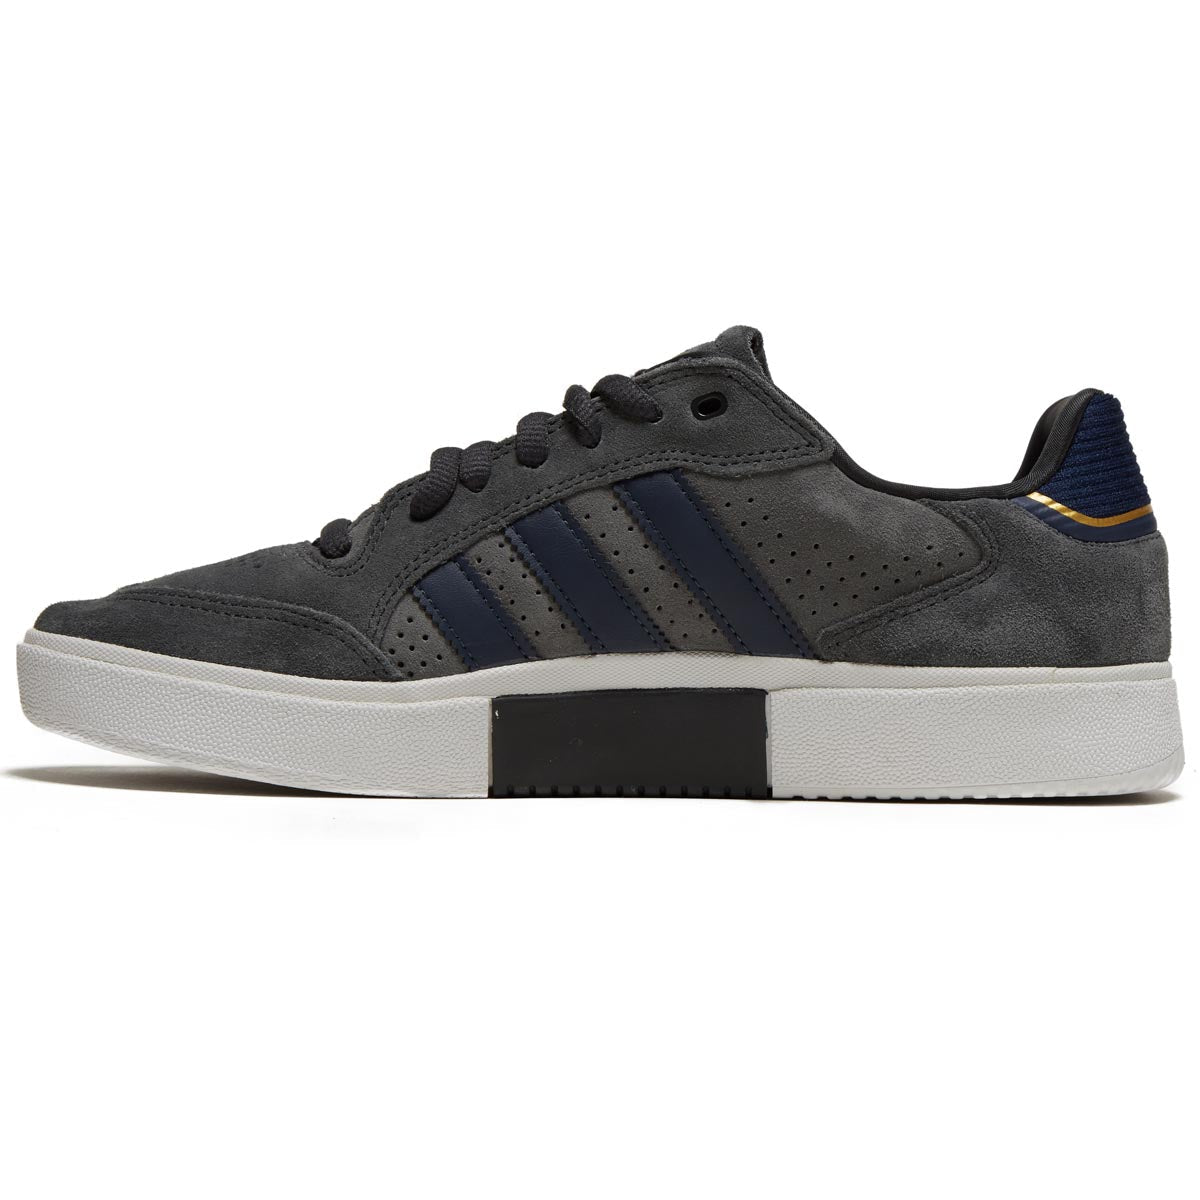 Adidas Tyshawn Low Shoes - Carbon/Carbon/Grey image 2